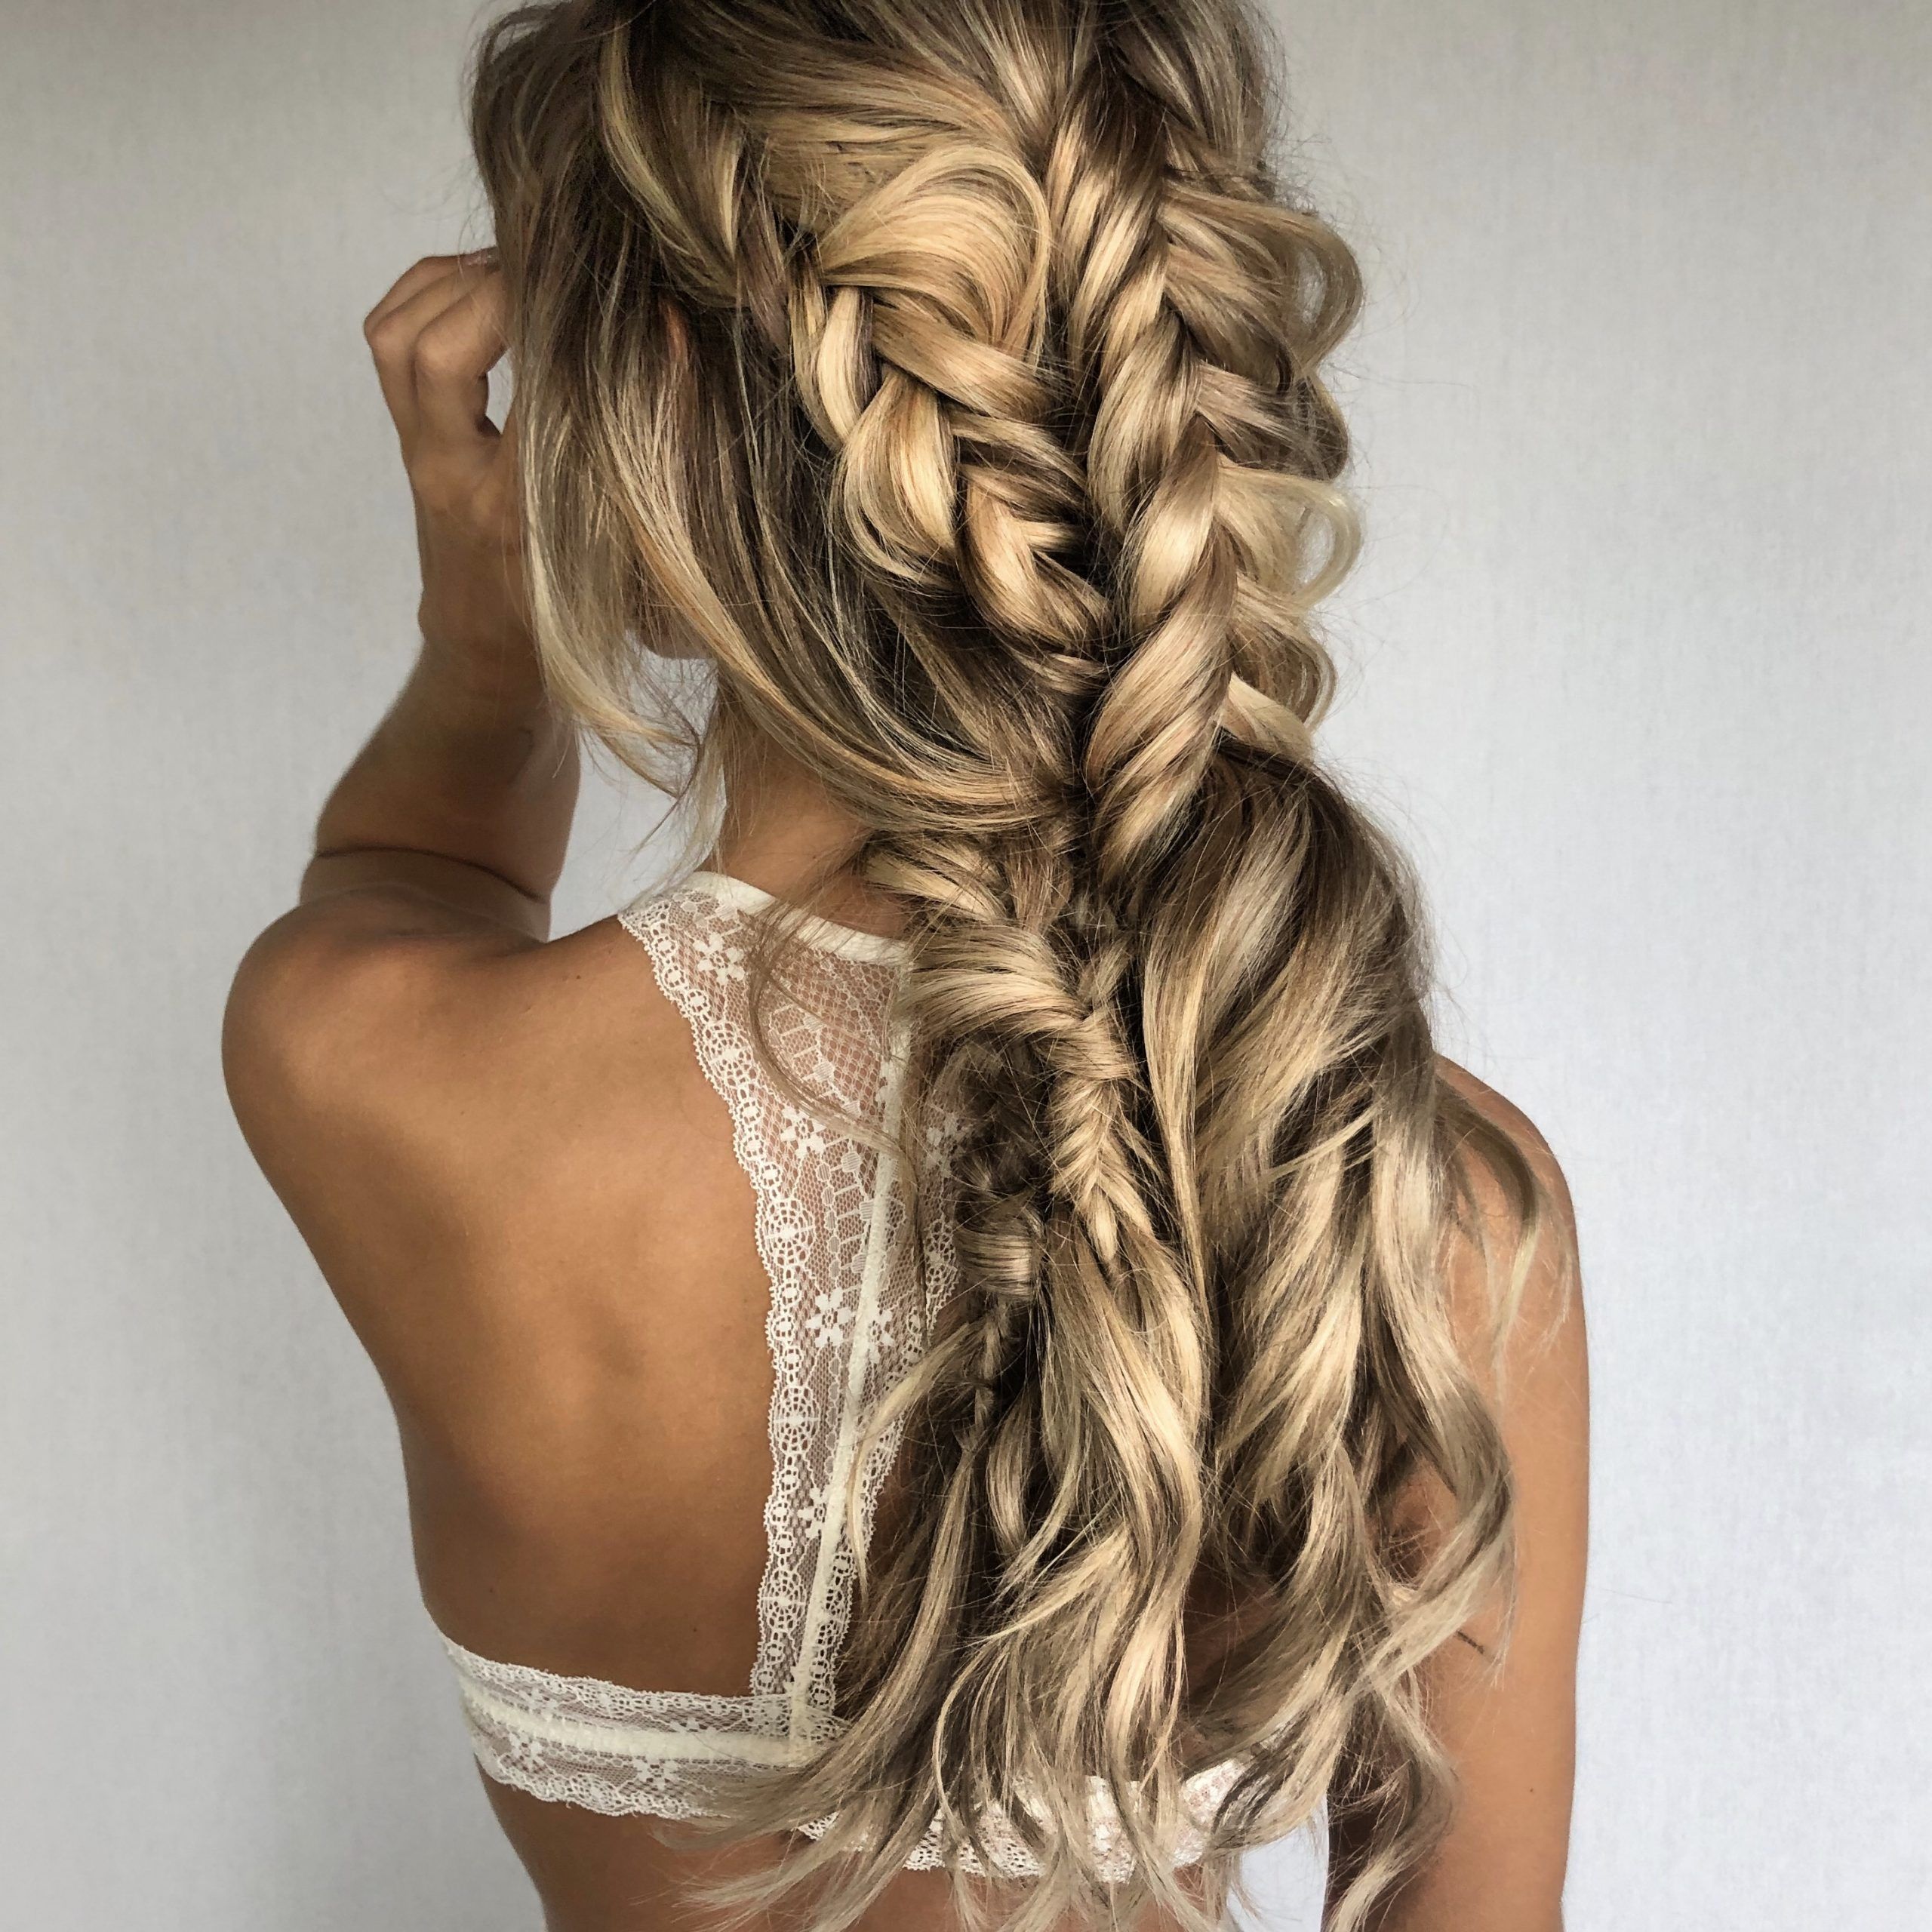 20 Boho Braids Hairstyles That Are Absolutely Gorgeous In Fashionable Fantastic Side Braid Hairstyles (View 6 of 20)